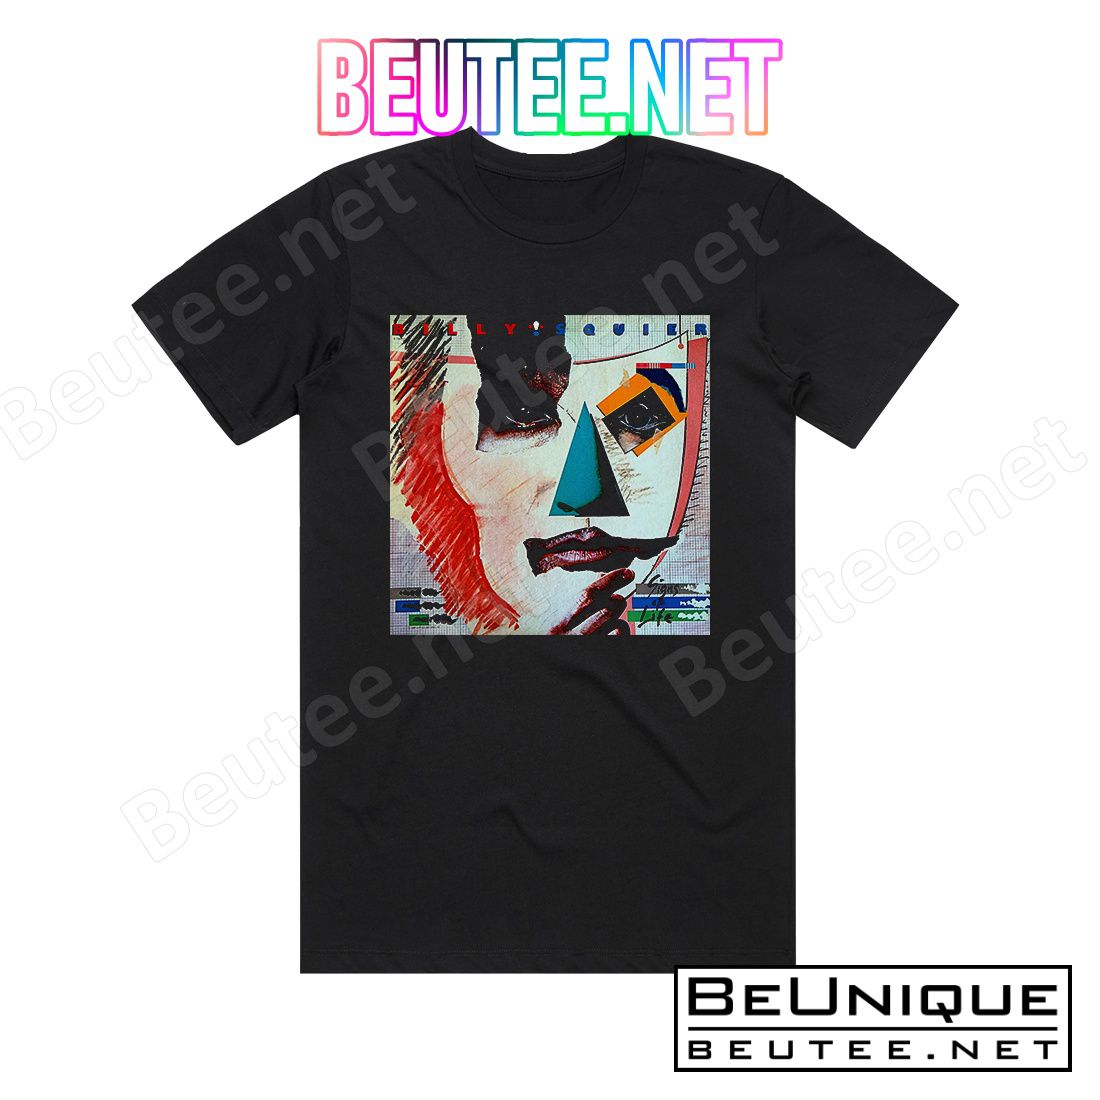 Billy Squier Signs Of Life Album Cover T-Shirt